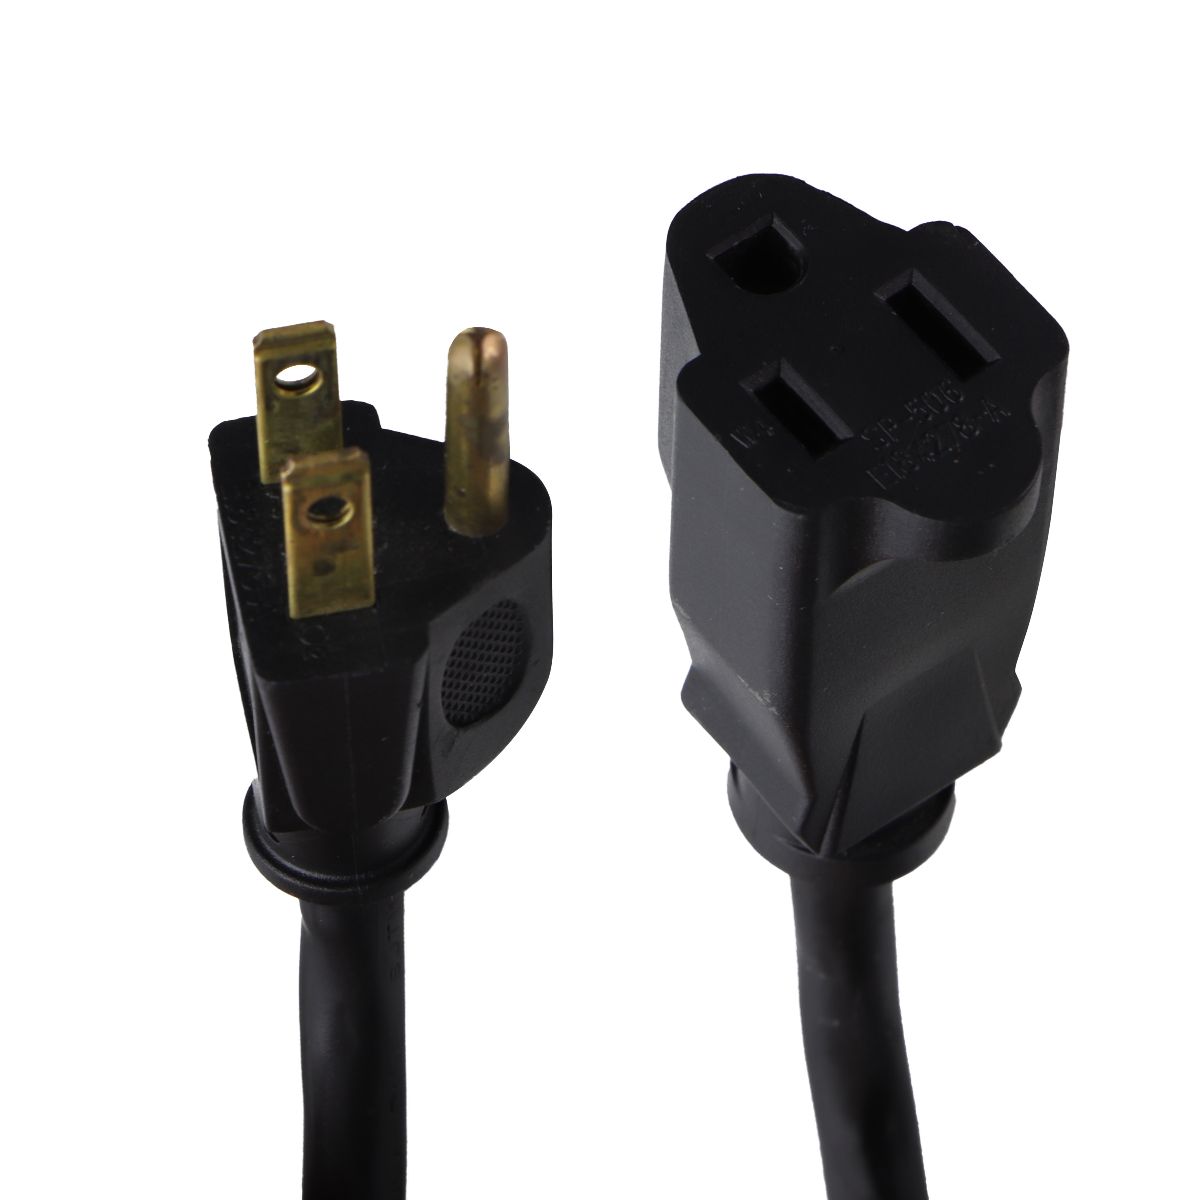 (8-Foot) Indoor/Outdoor Grounded Extension Cable 16AWG 300V - Black